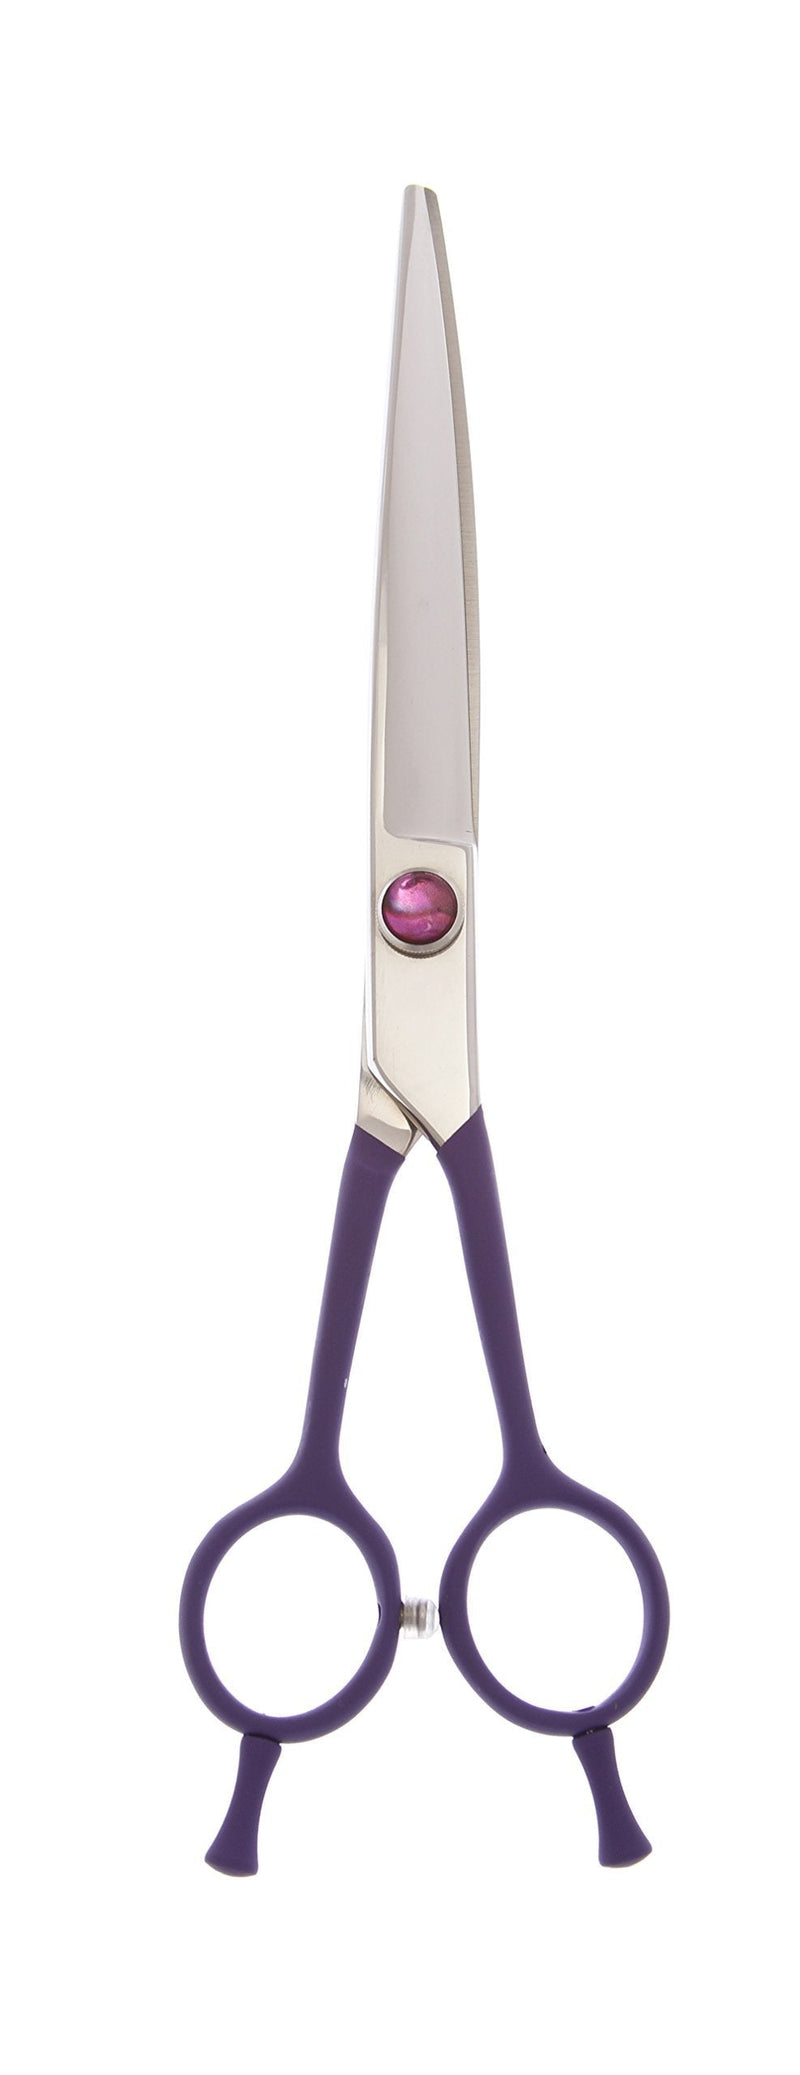 [Australia] - ShearsDirect Japanese Stainless Steel Curved Shear, 7.5" 